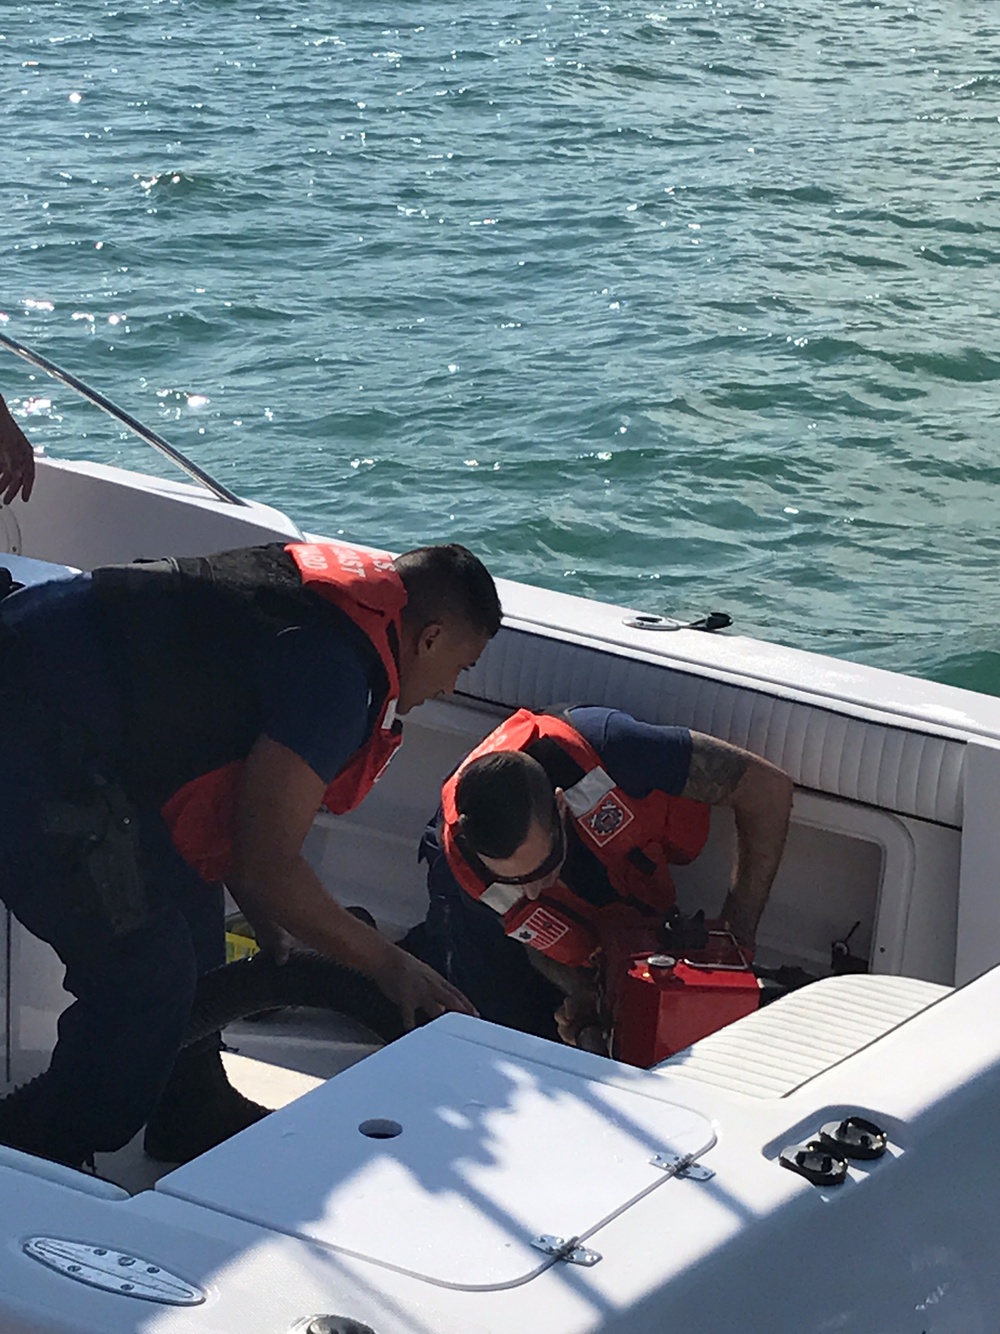 Coast Guard rescues 3 after boat takes on water